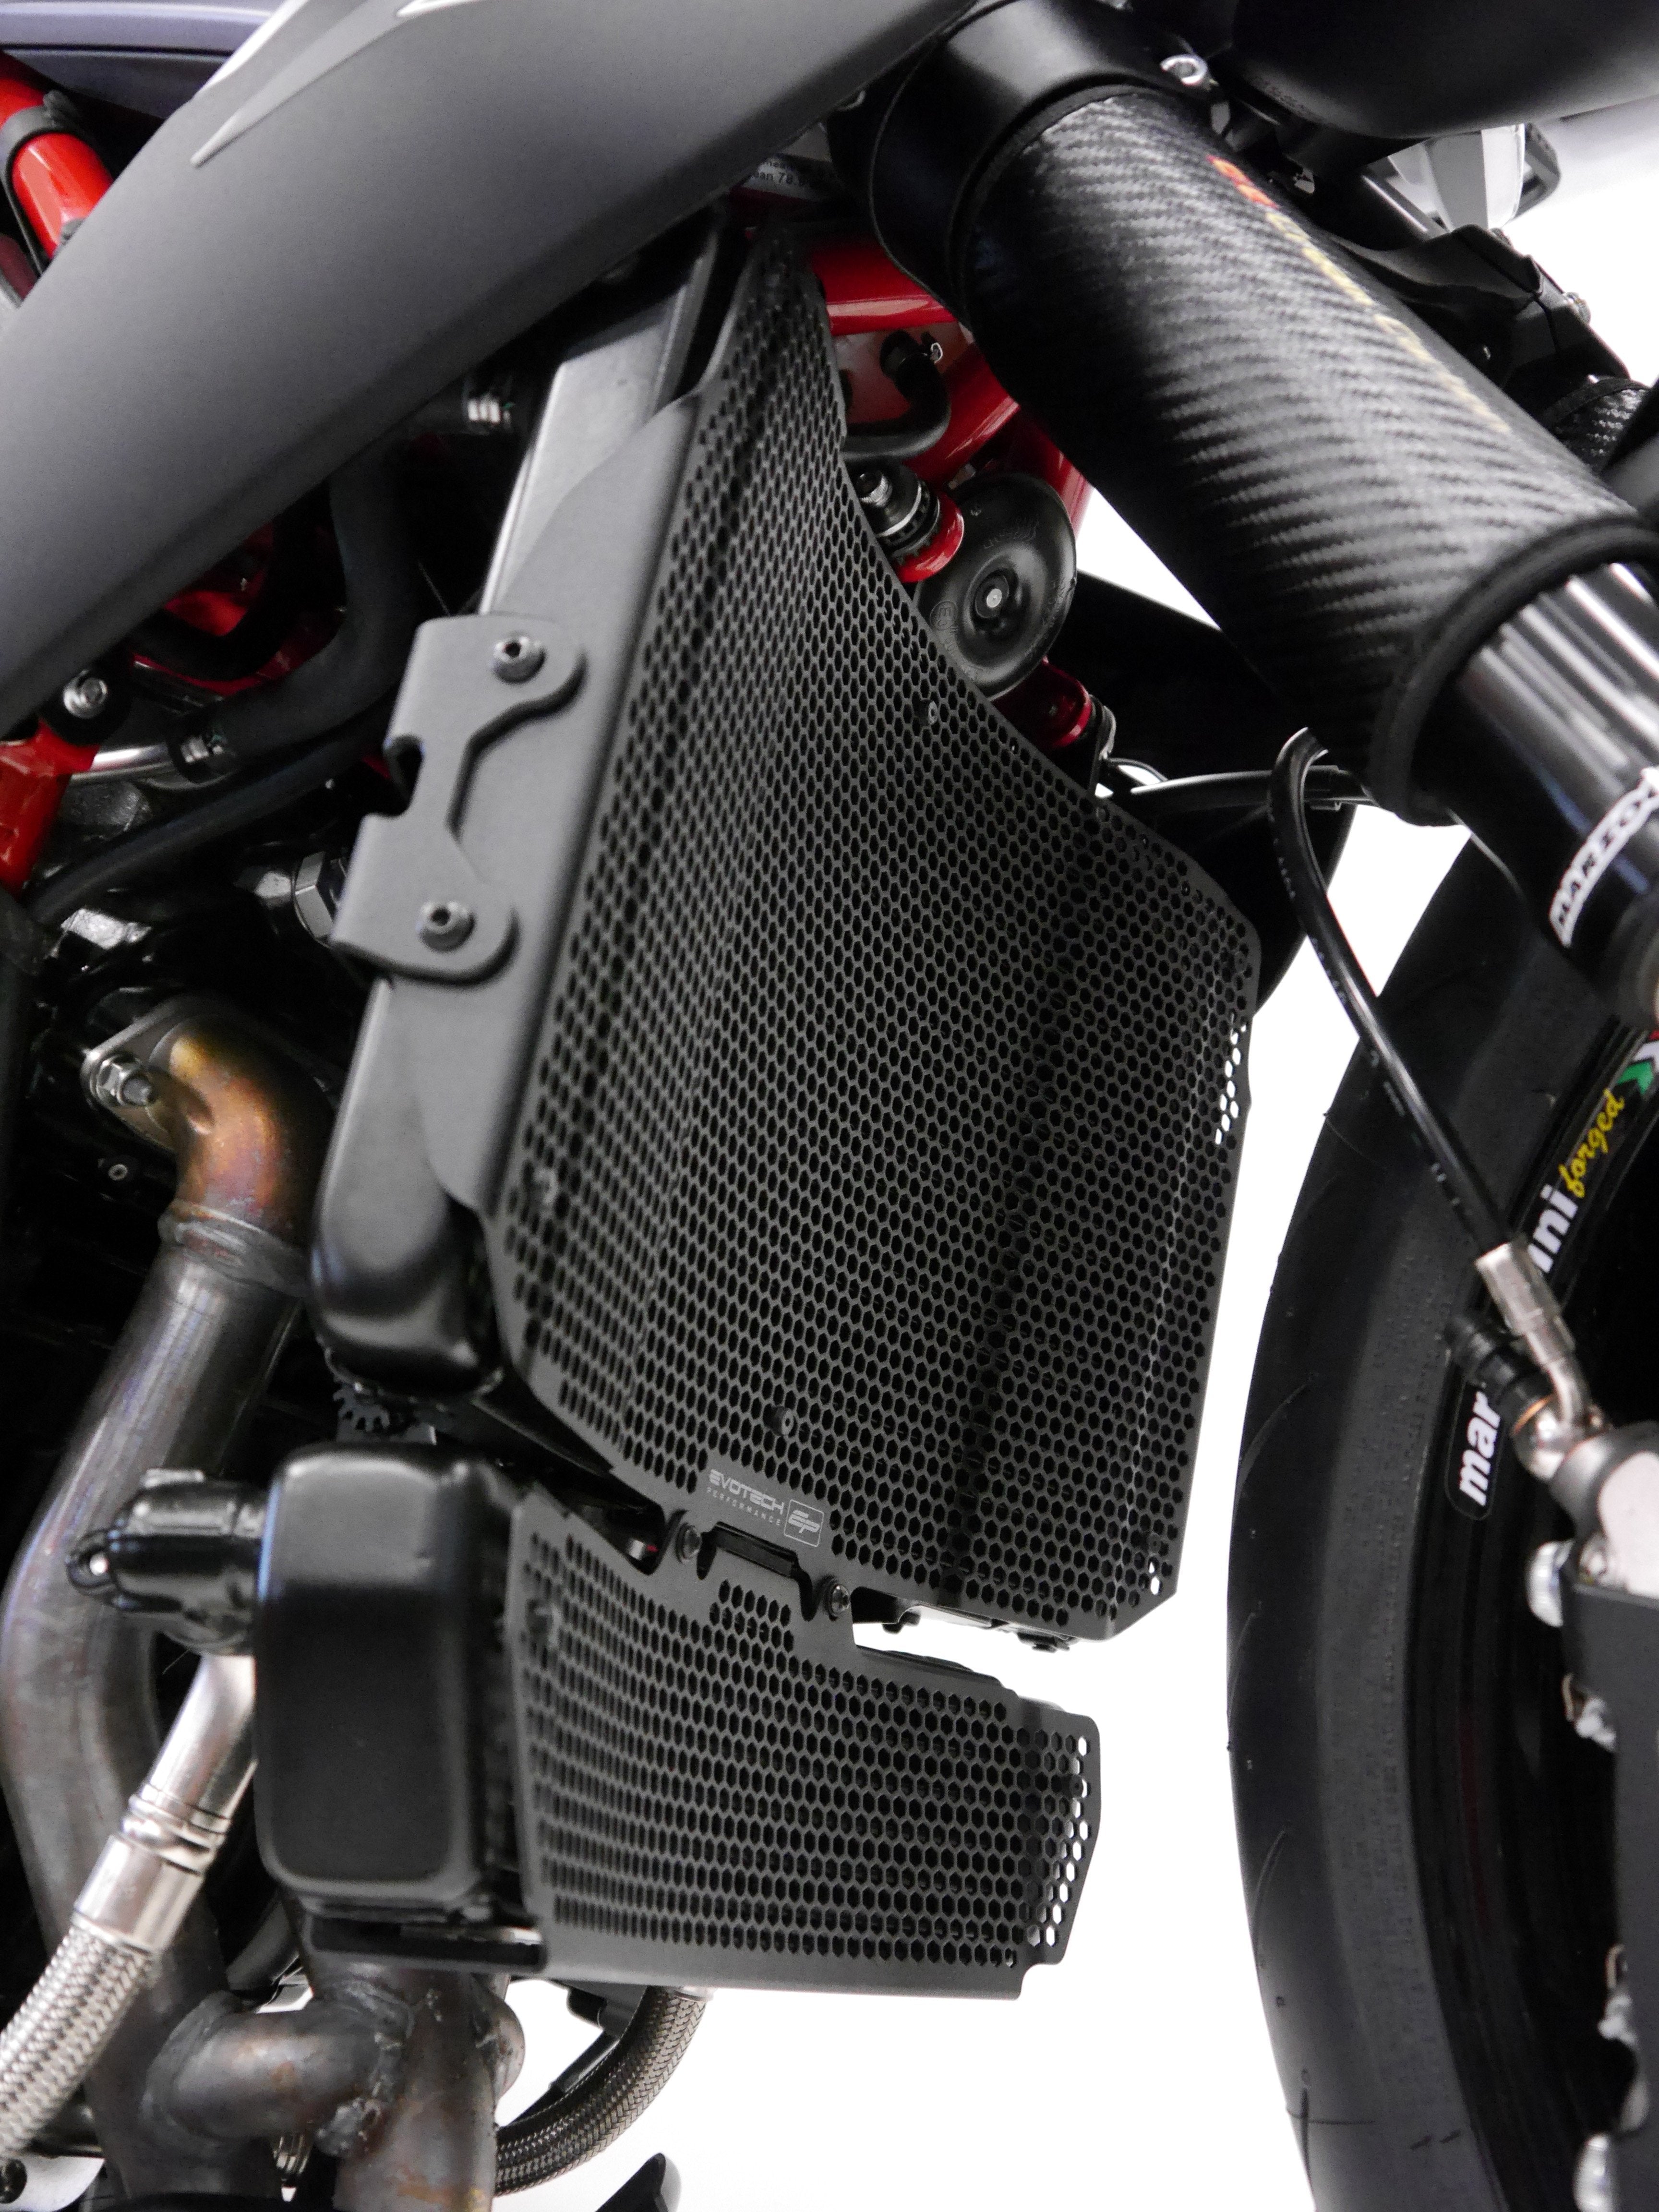 EP Radiator and Oil Cooler Guard installed on the MV Agusta Brutale 800 RR LH44